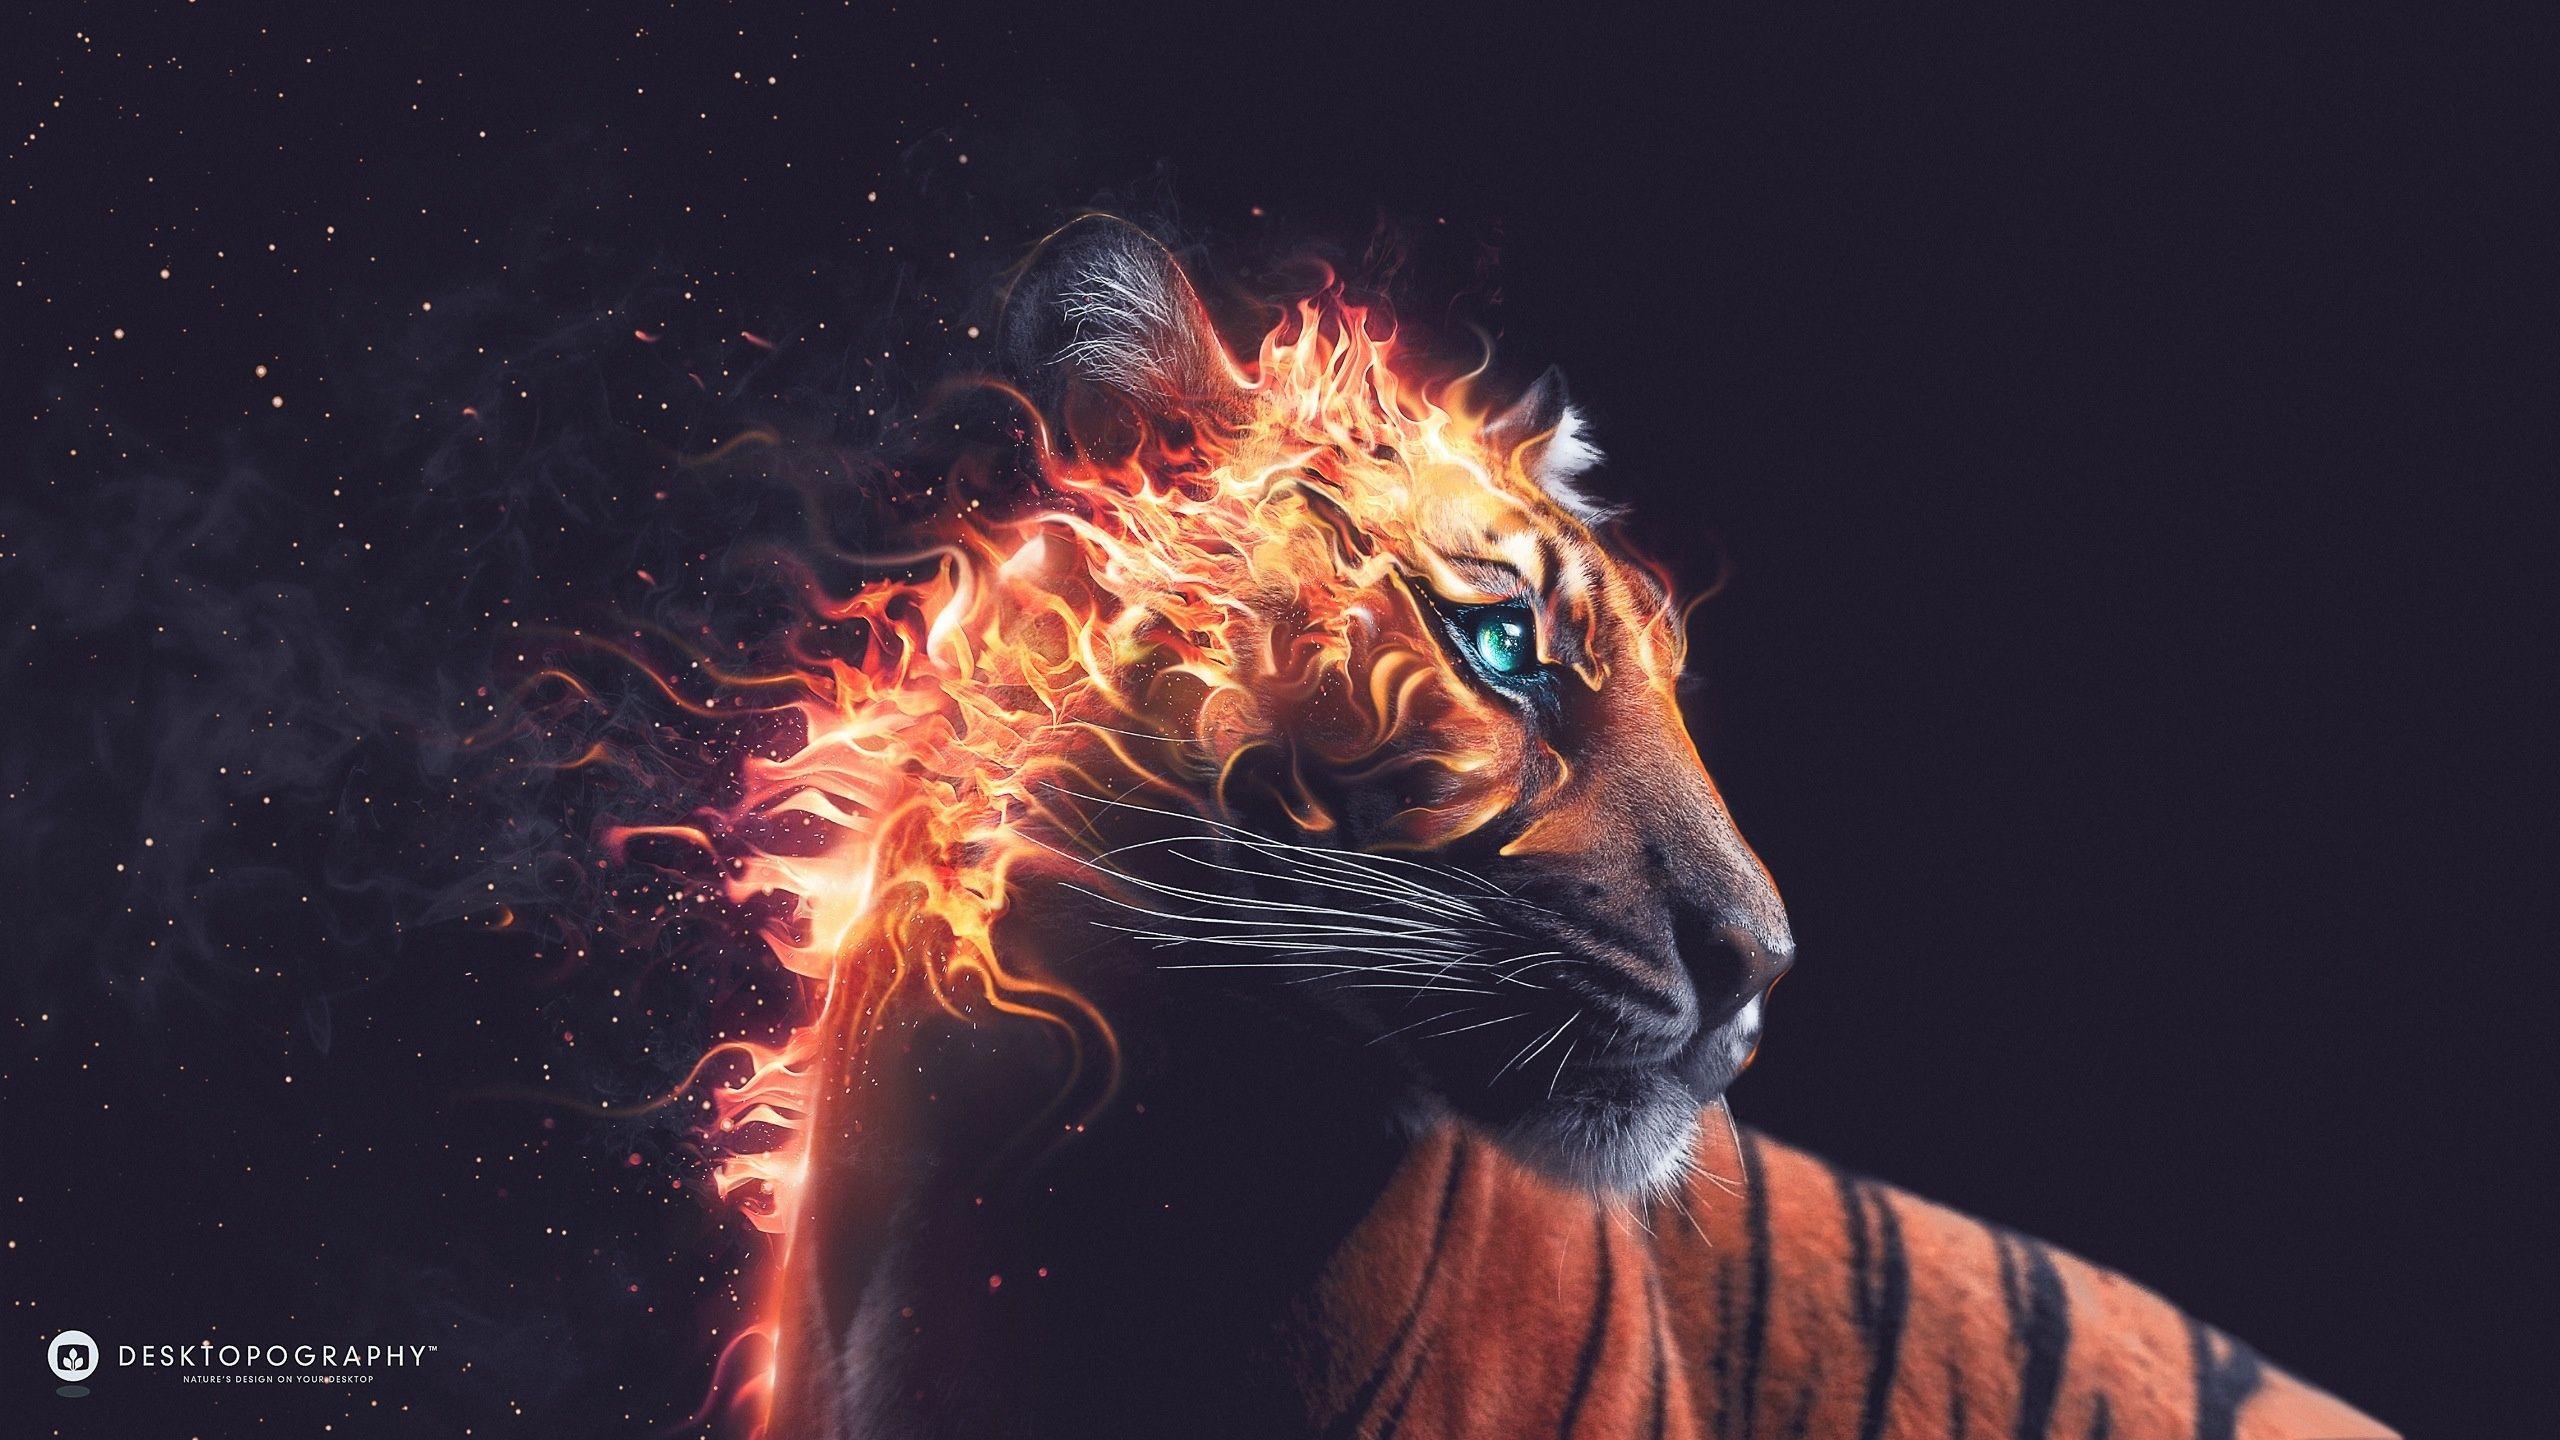 Tiger Fire Wallpaper in jpg format for free download